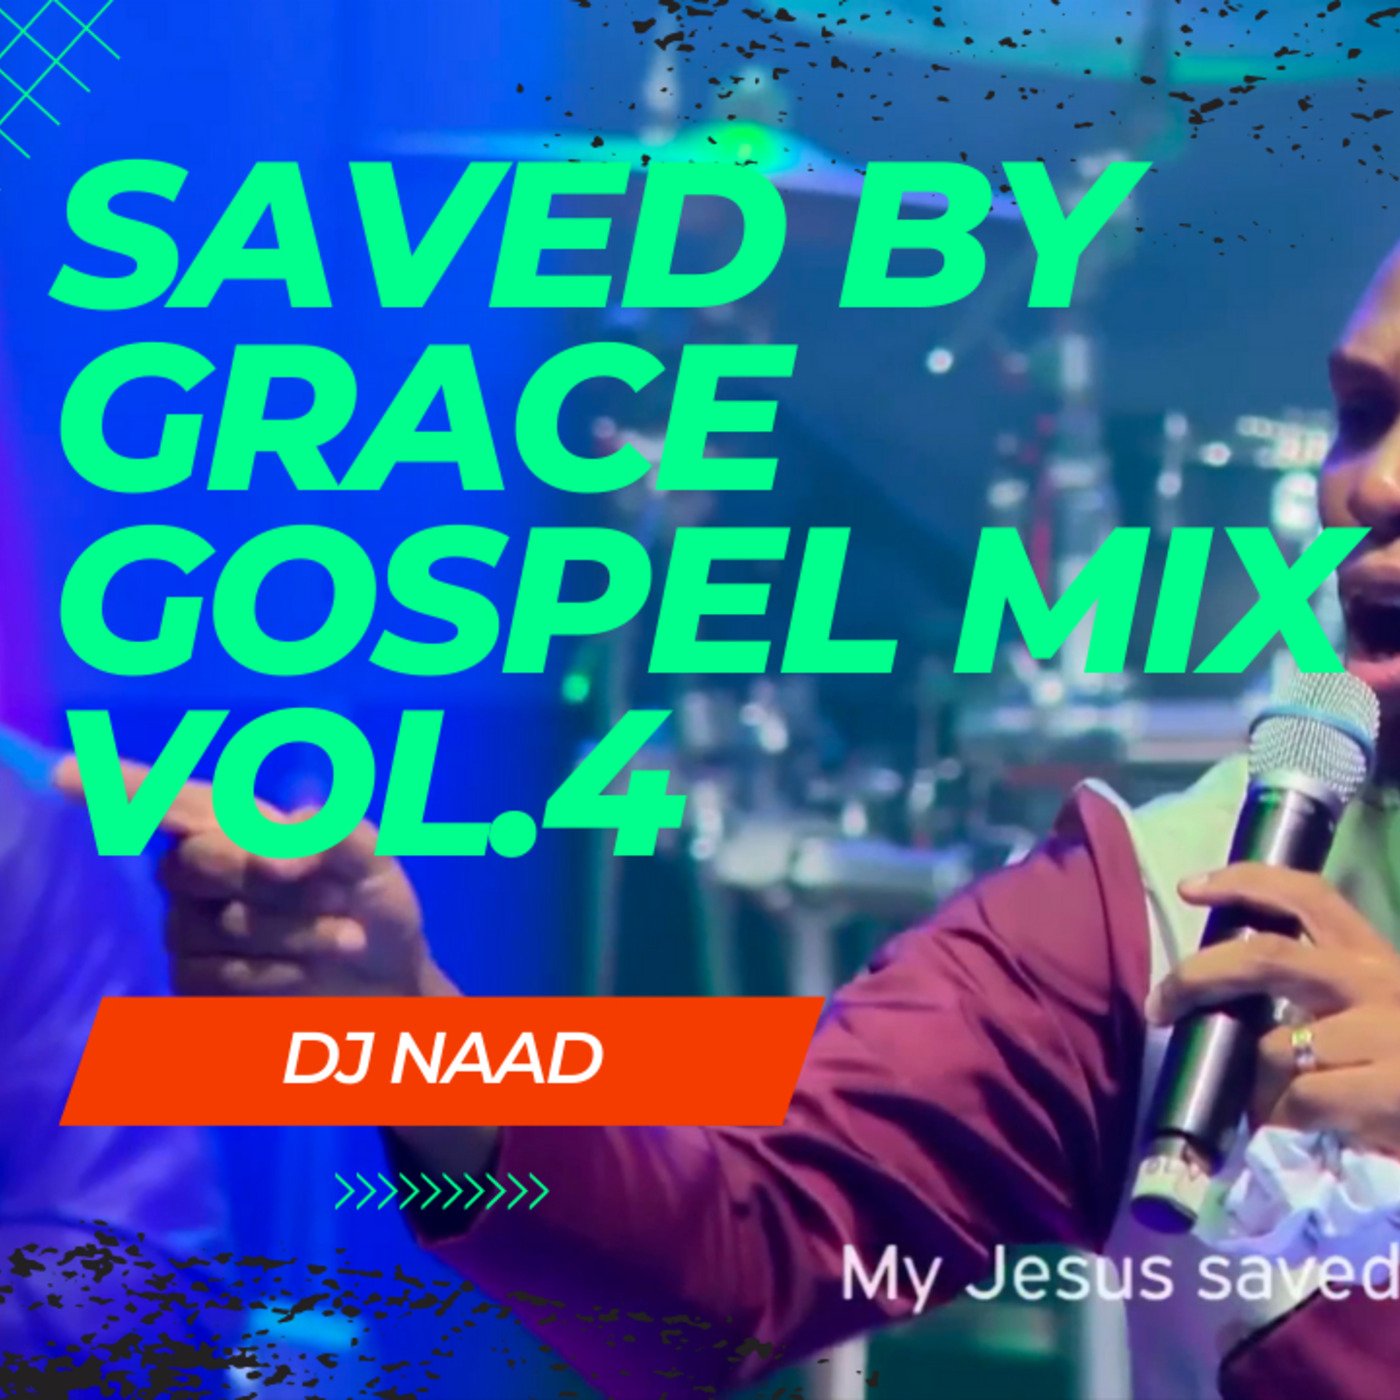 Saved By Grace Gospel Praise and Worship music mix vol.4 by DJ Naad (Video link in description)